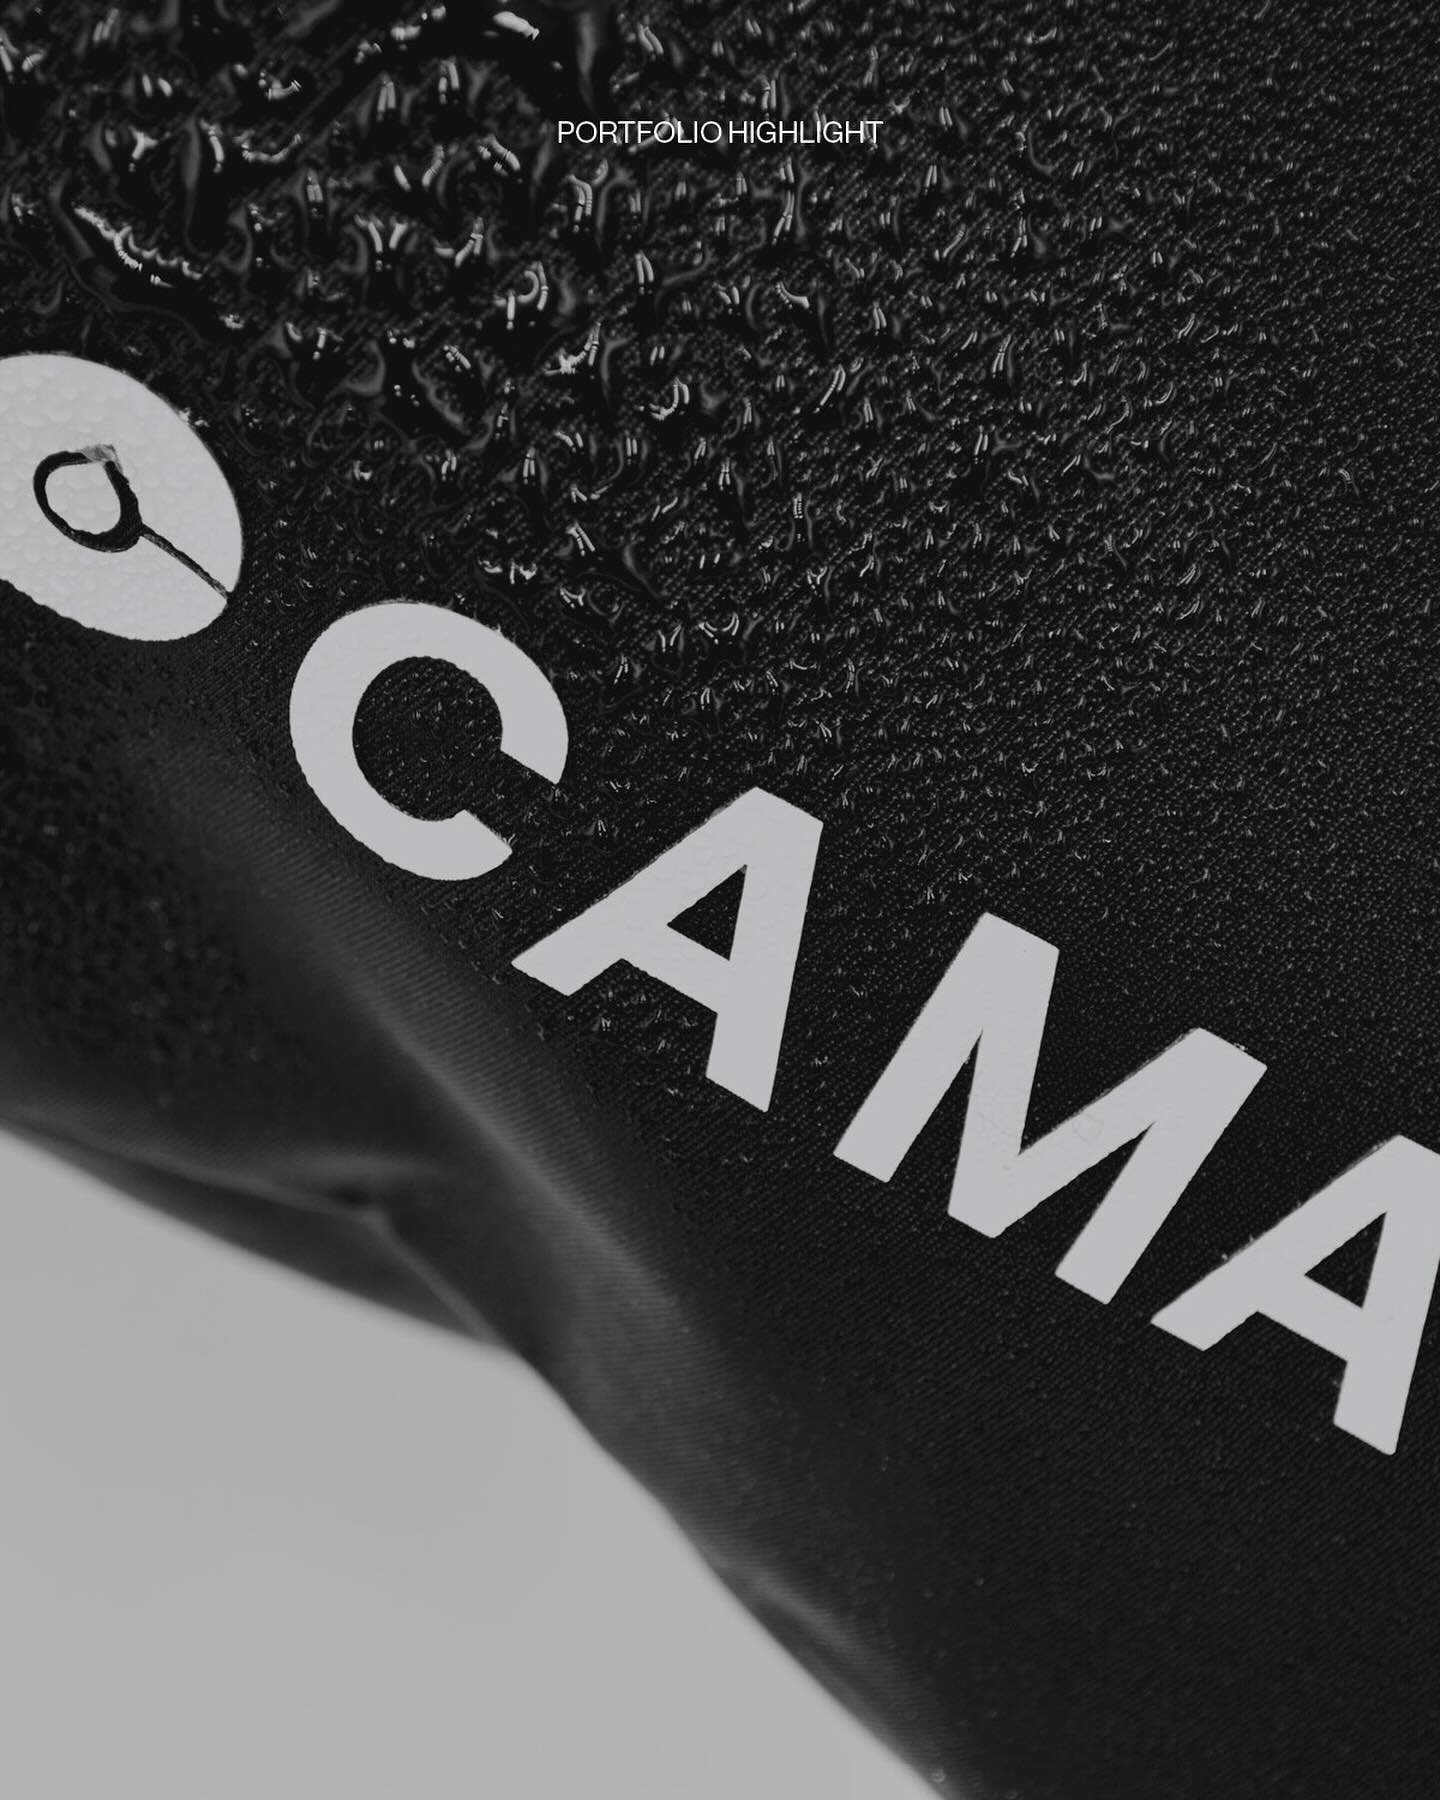 Introducing your new workout buddy - the CAMA Bag. With its odor absorbing fabrics, the CAMA Bag helps you ditch the stink and #keepmoving. Learn more at camafit.com